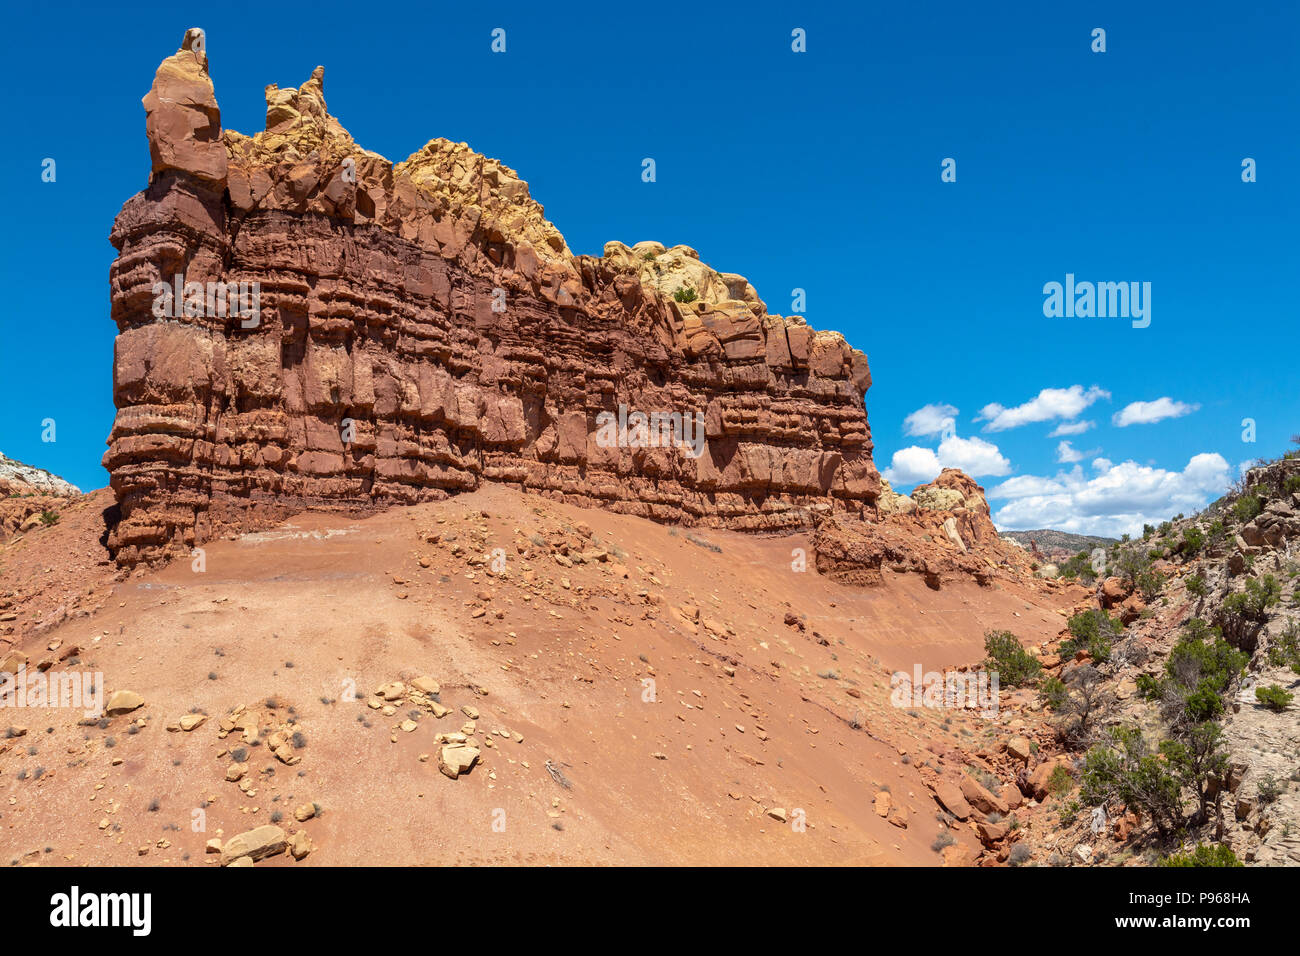 New Mexico, U.S. Highway 84, red rock country between Abiquiu and Ghost Ranch Stock Photo